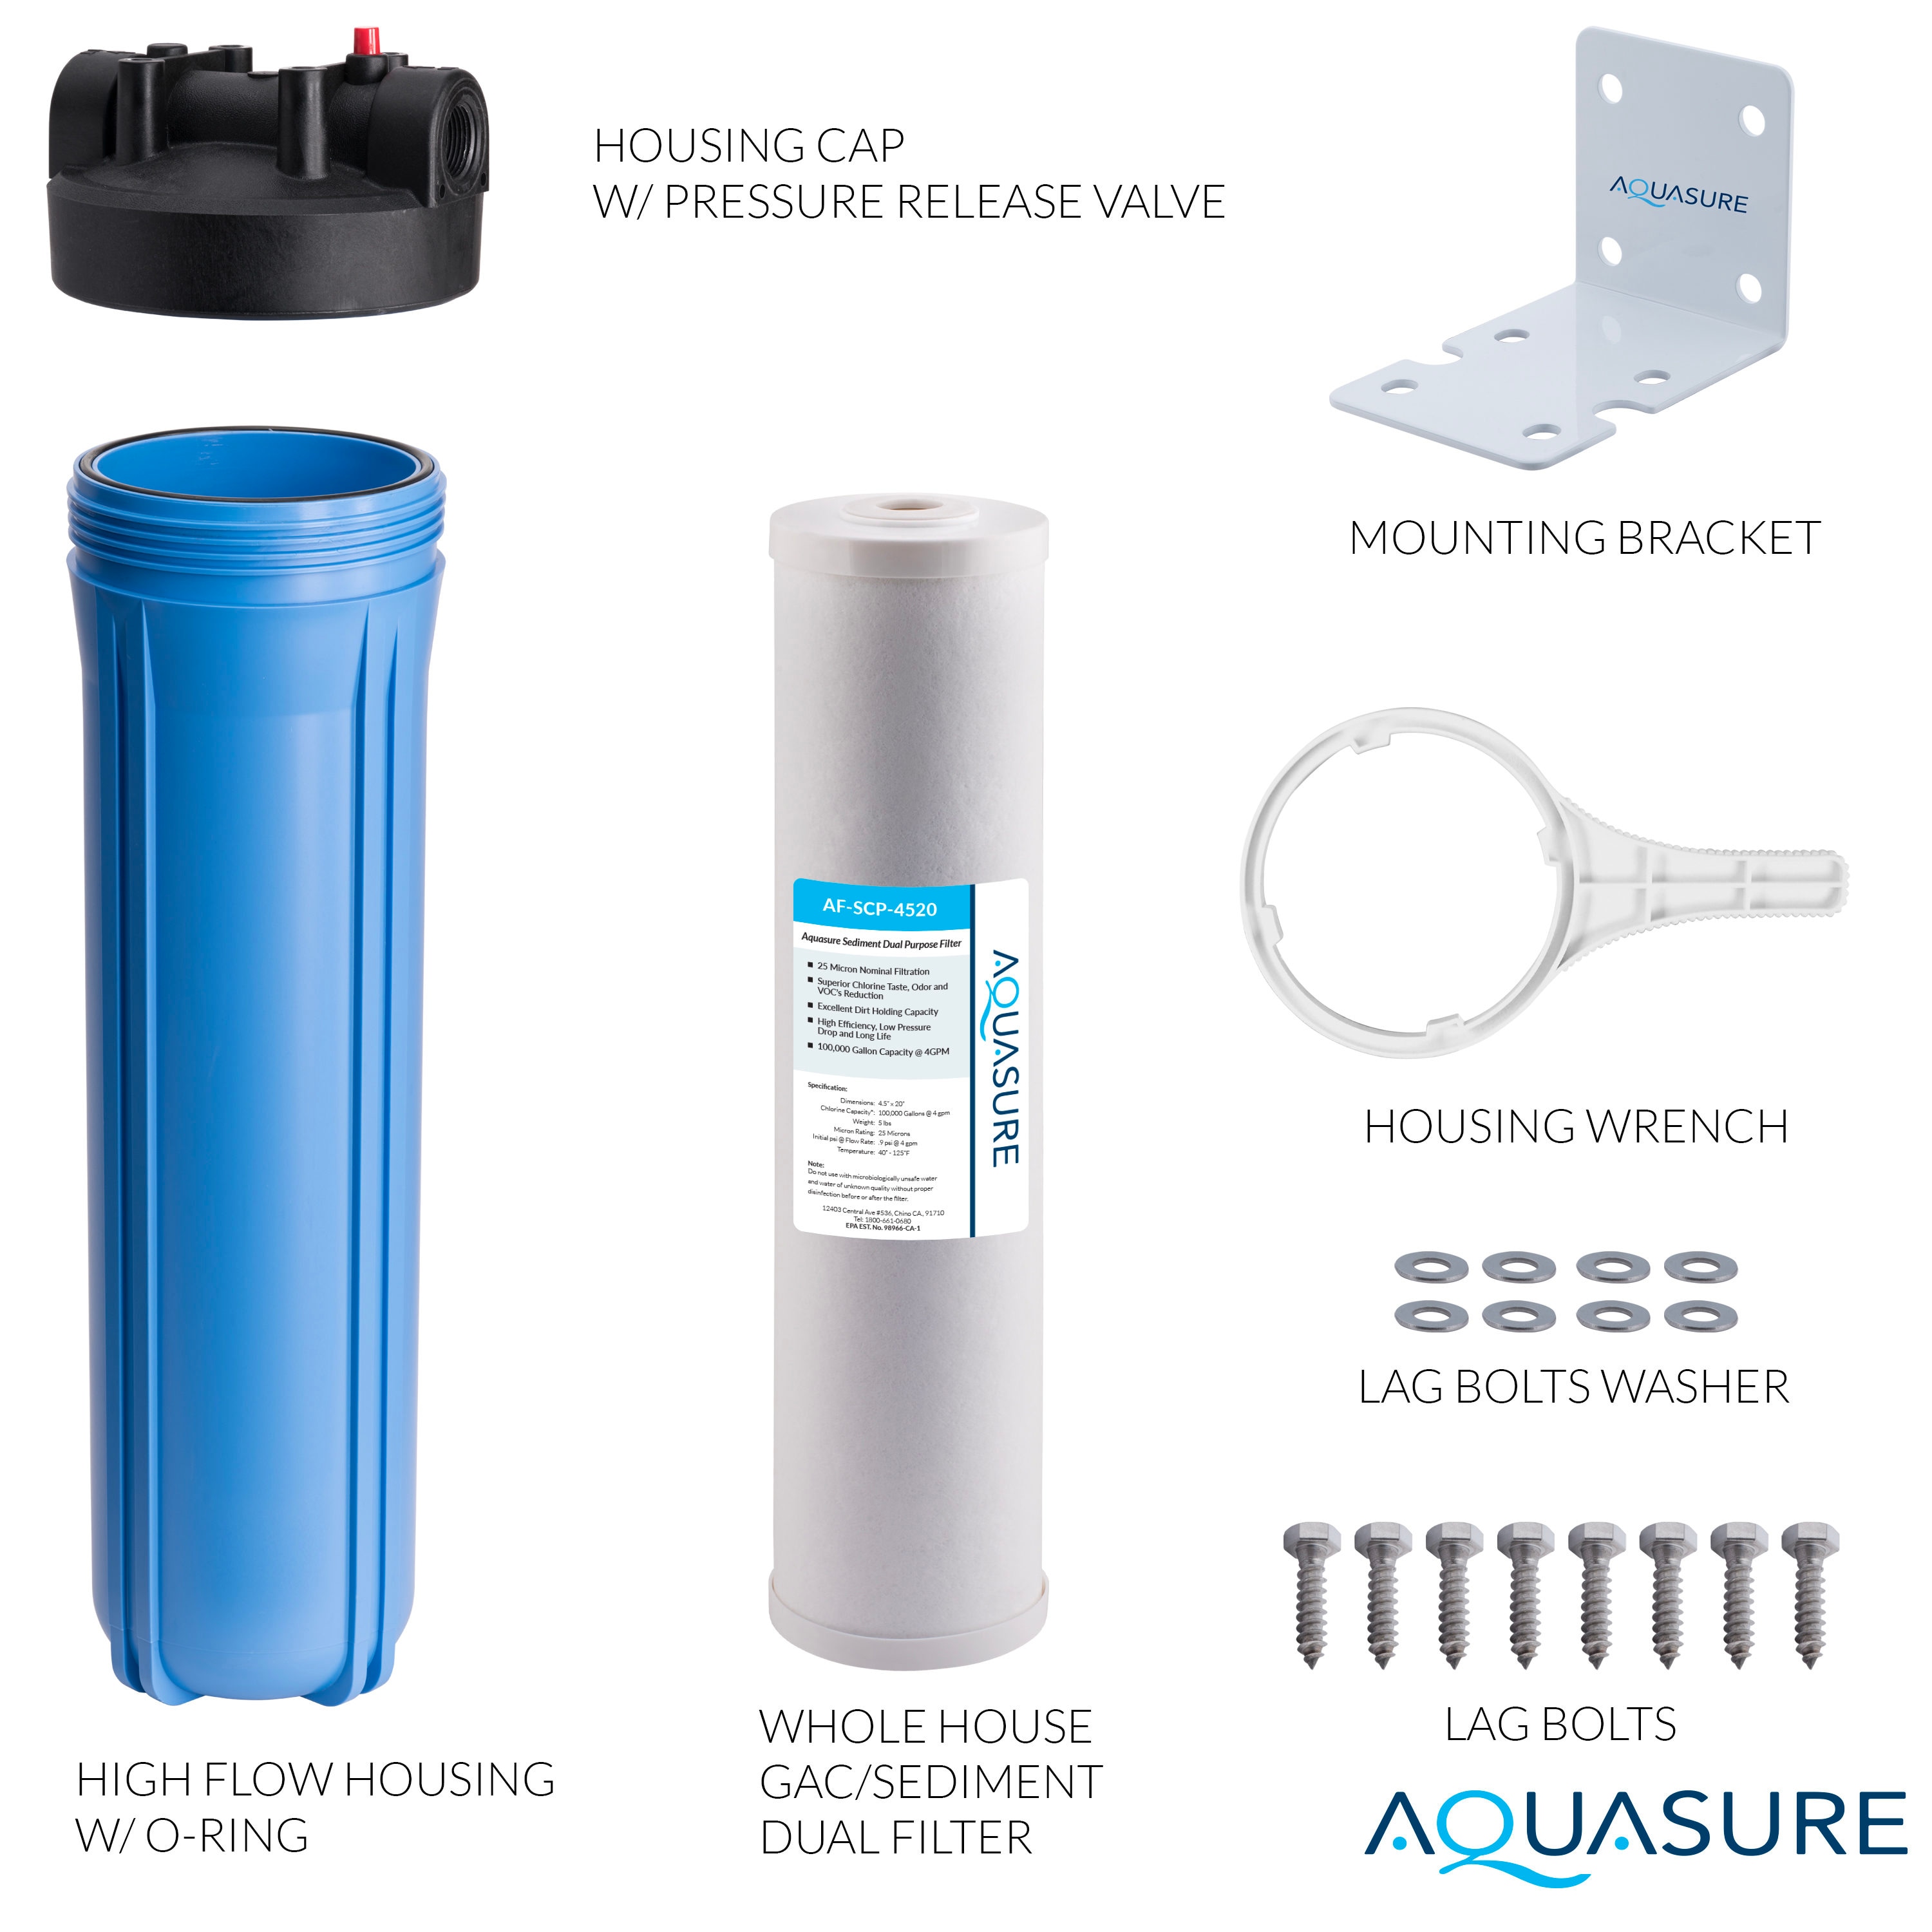 High-Flow Whole Home Water Filter System with Pressure Release Button